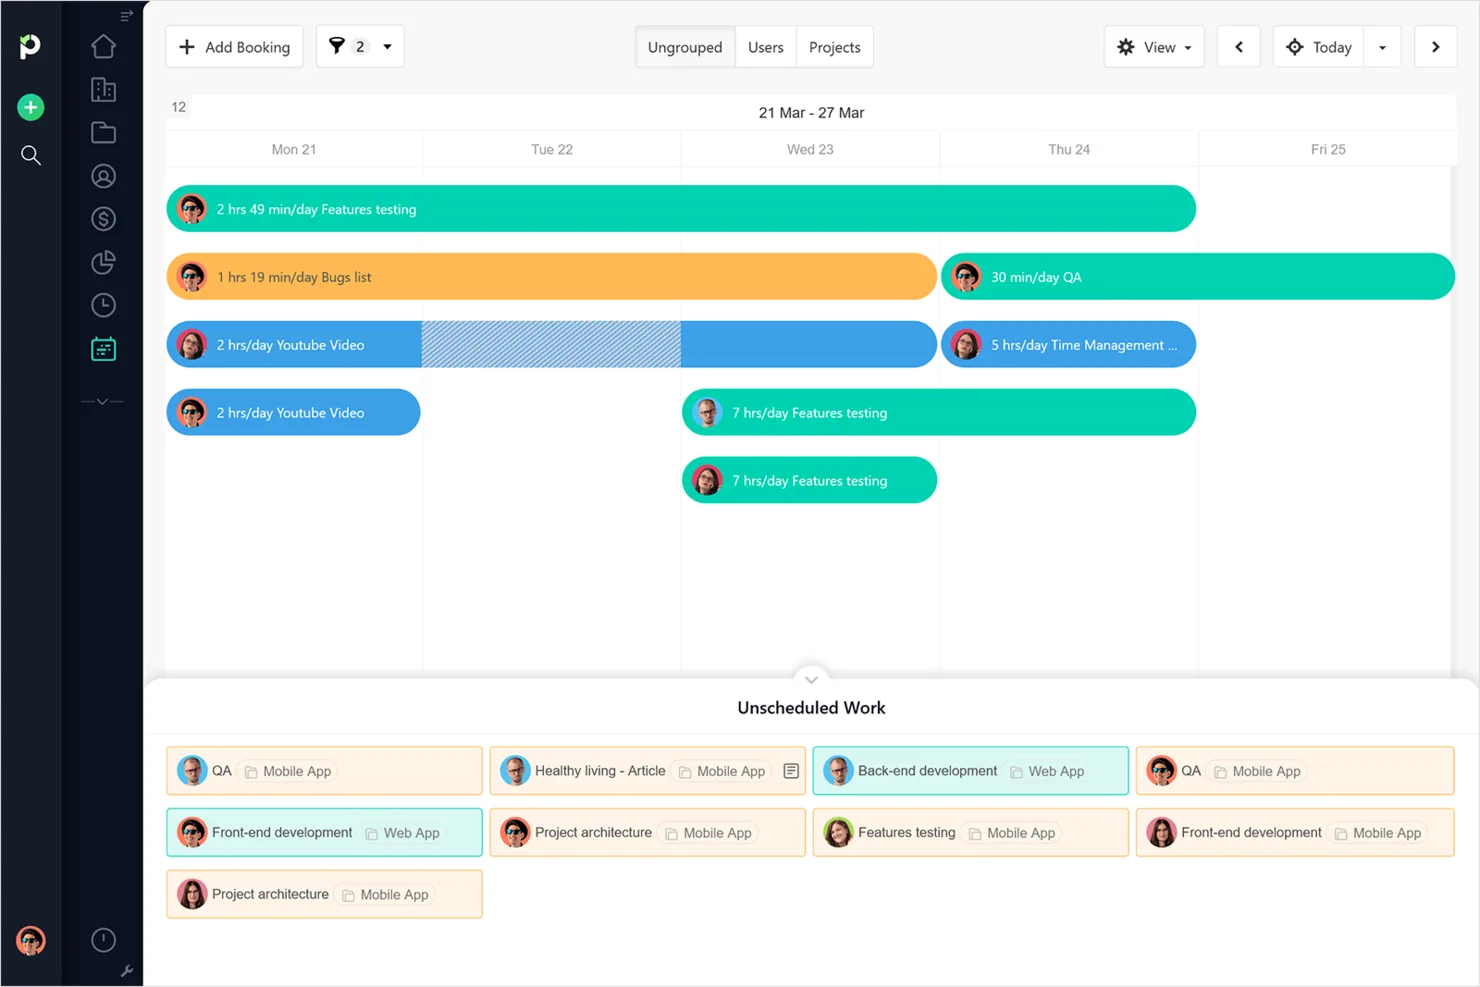 Paymo is a work and project management tool